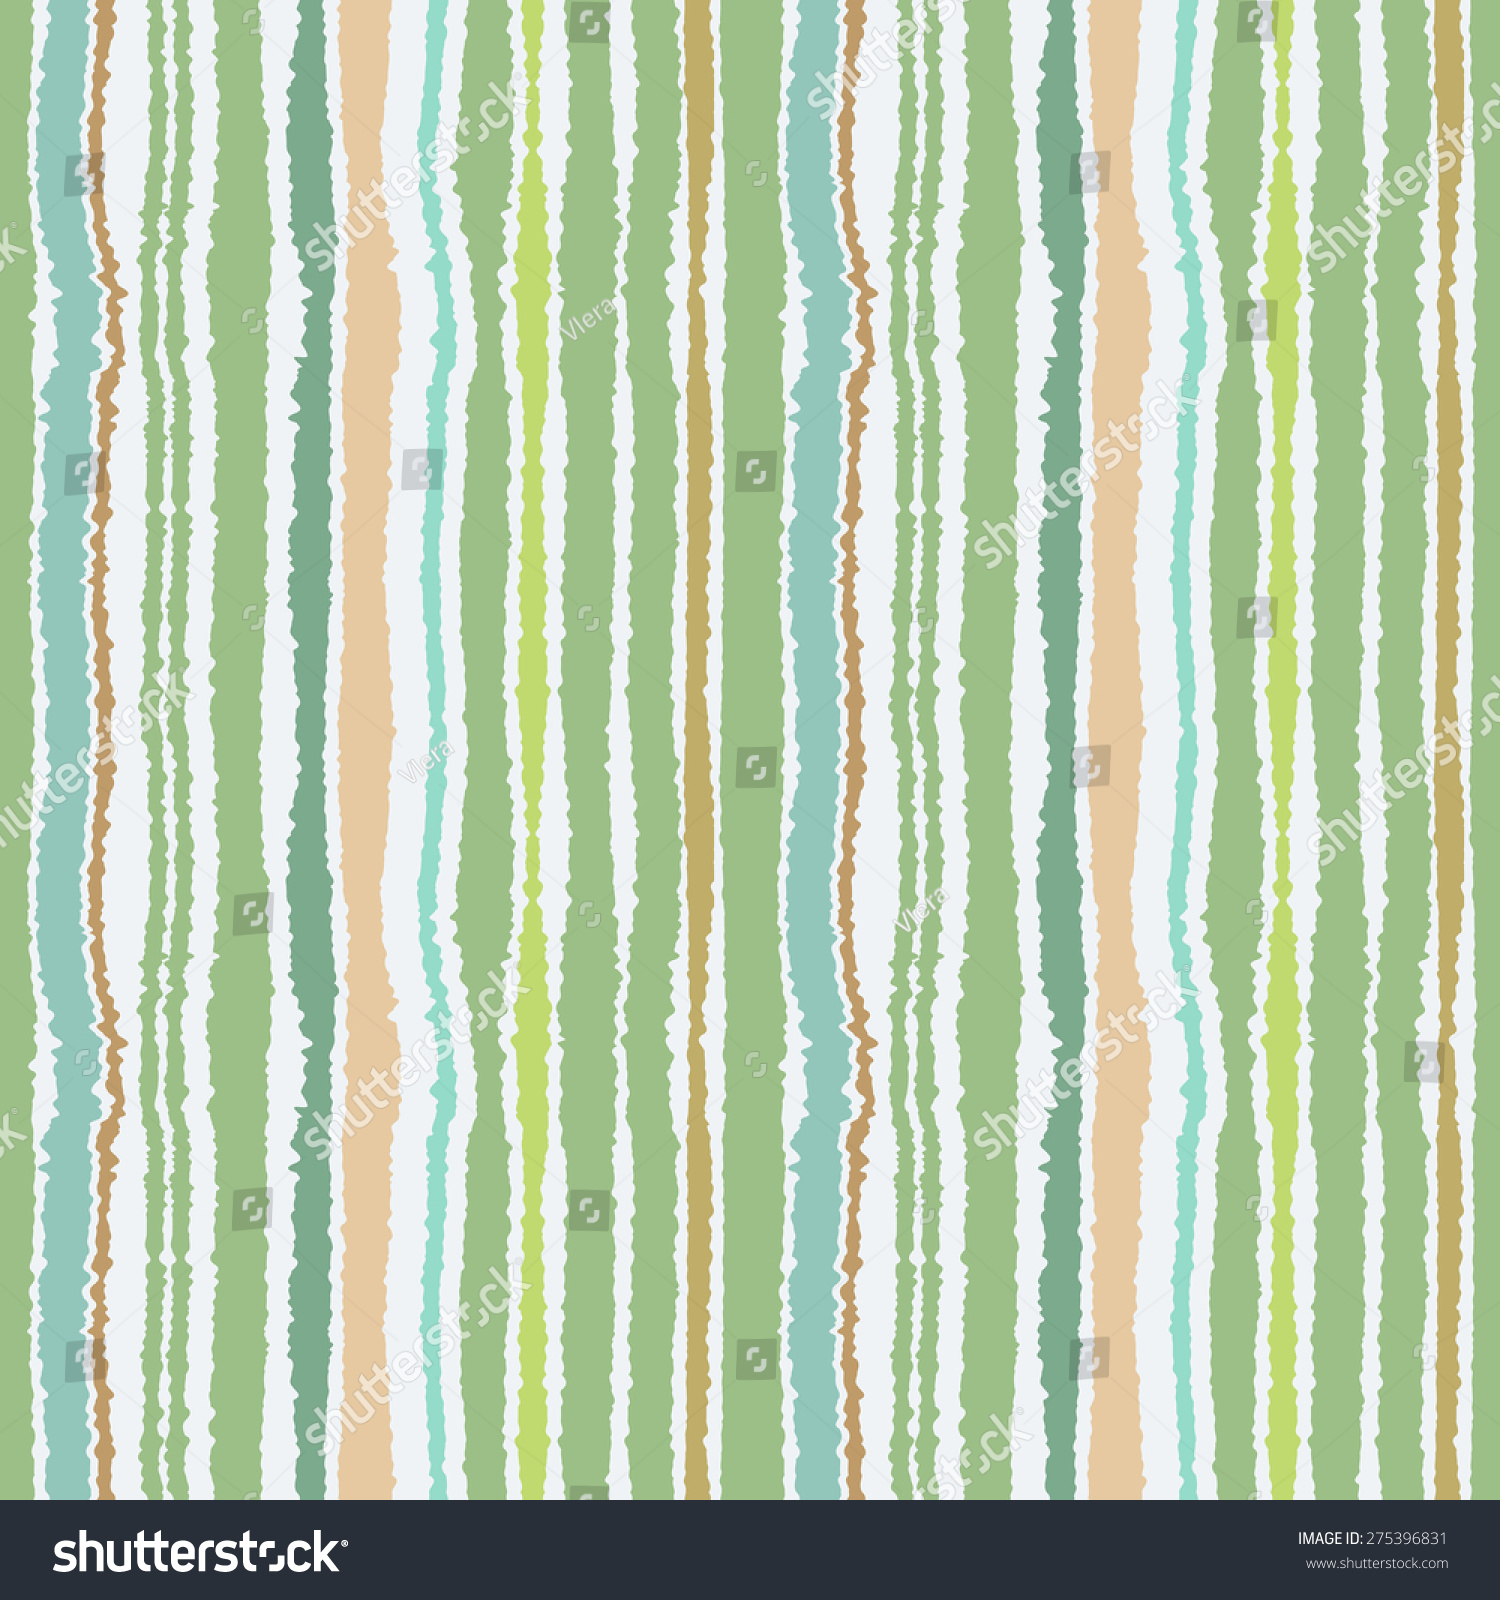 Seamless Strip Pattern. Vertical Lines With Torn Paper Effect. Shred ...